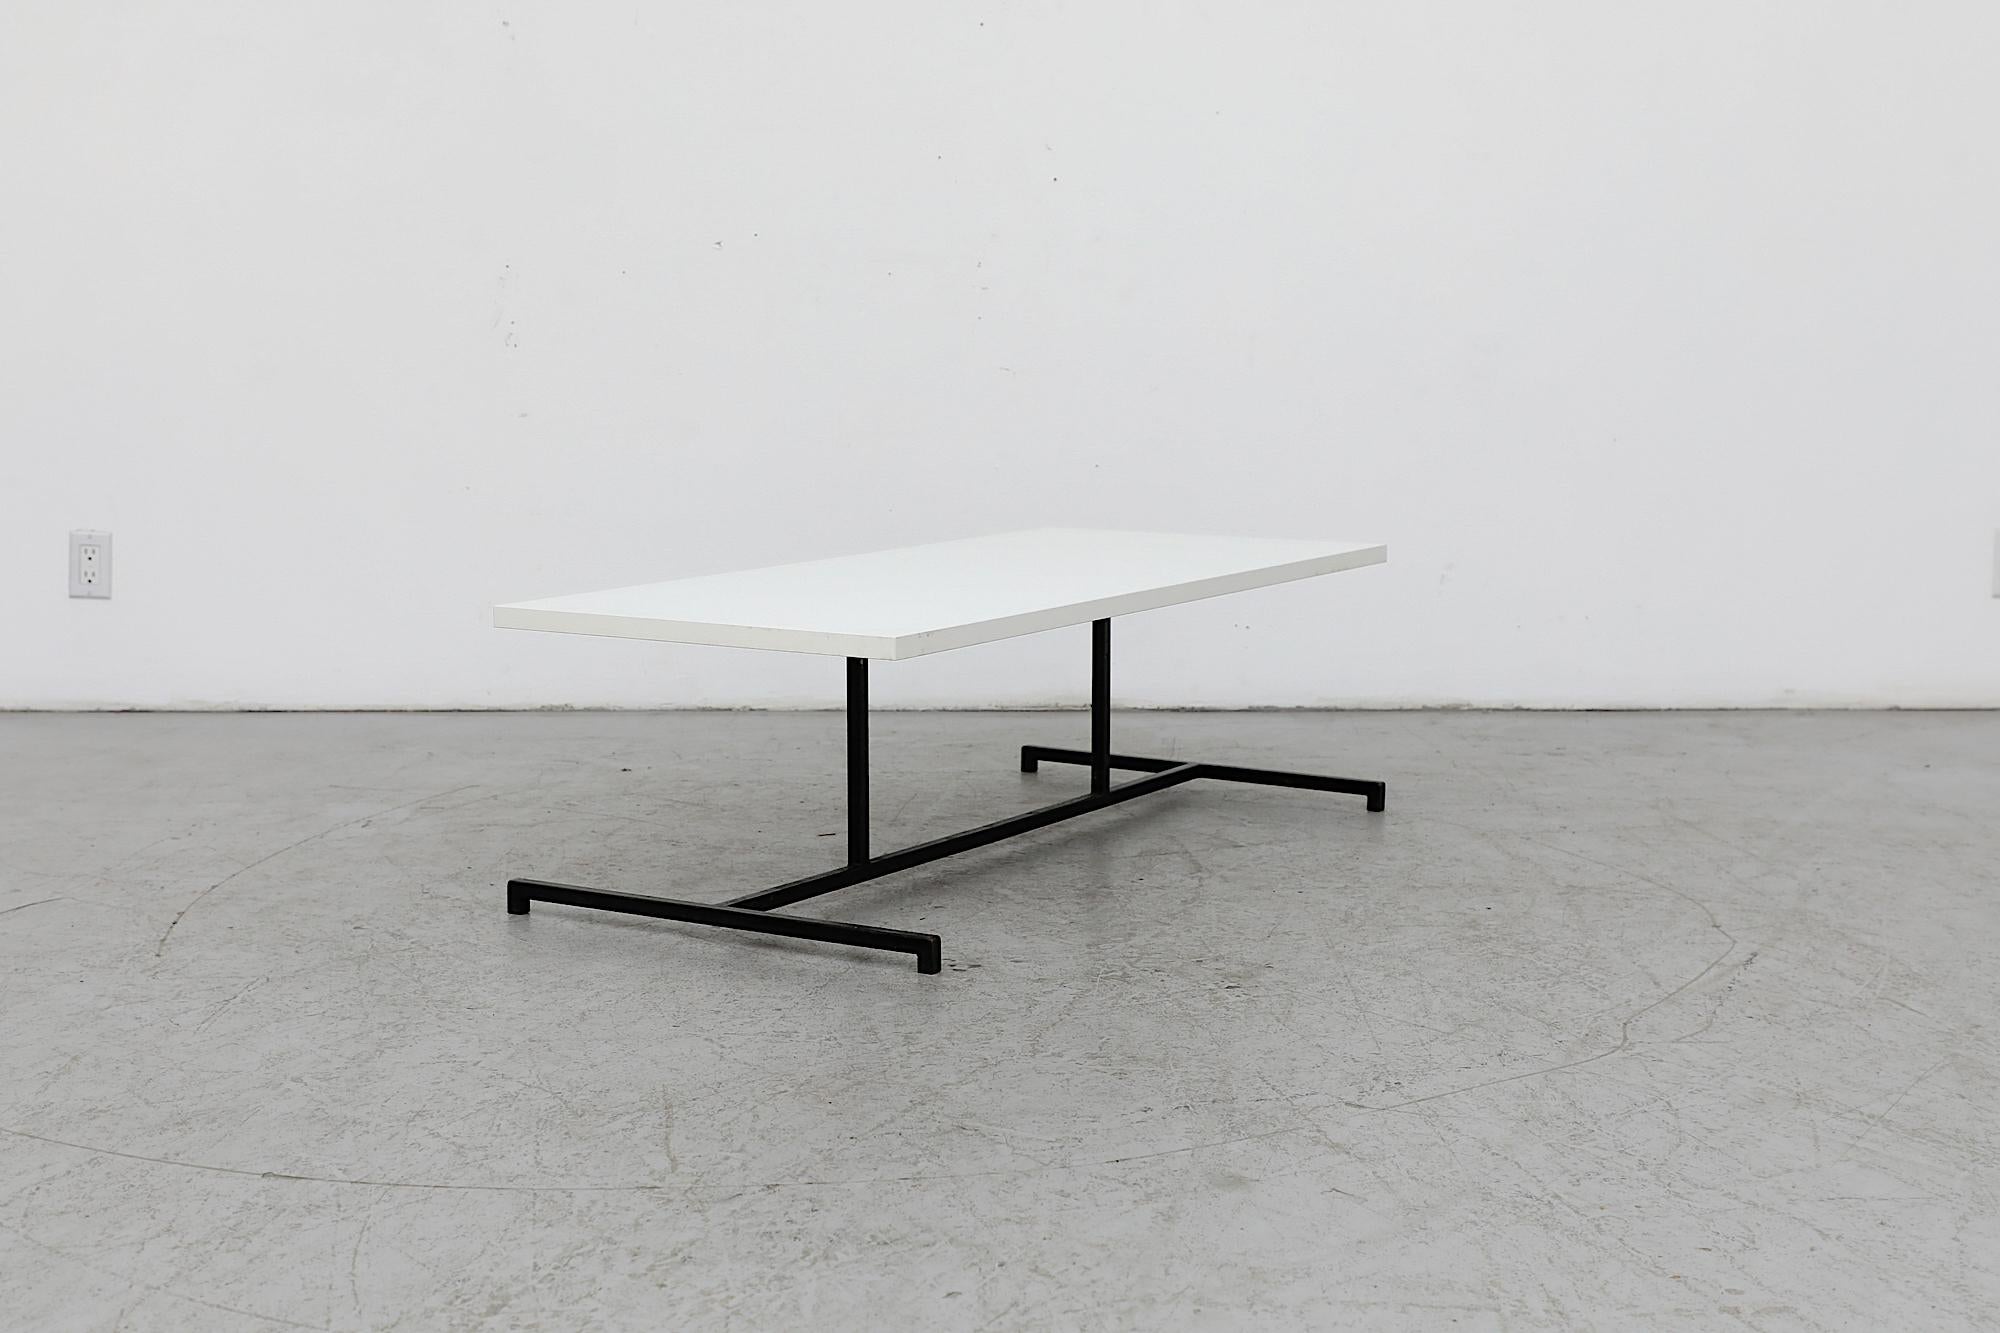 A 1970's modernist black and white coffee table with a white laminate top and a black enameled architectural metal base. In original condition with visible wear, including scratching and wear to the top and frame. Wear is consistent with its age and